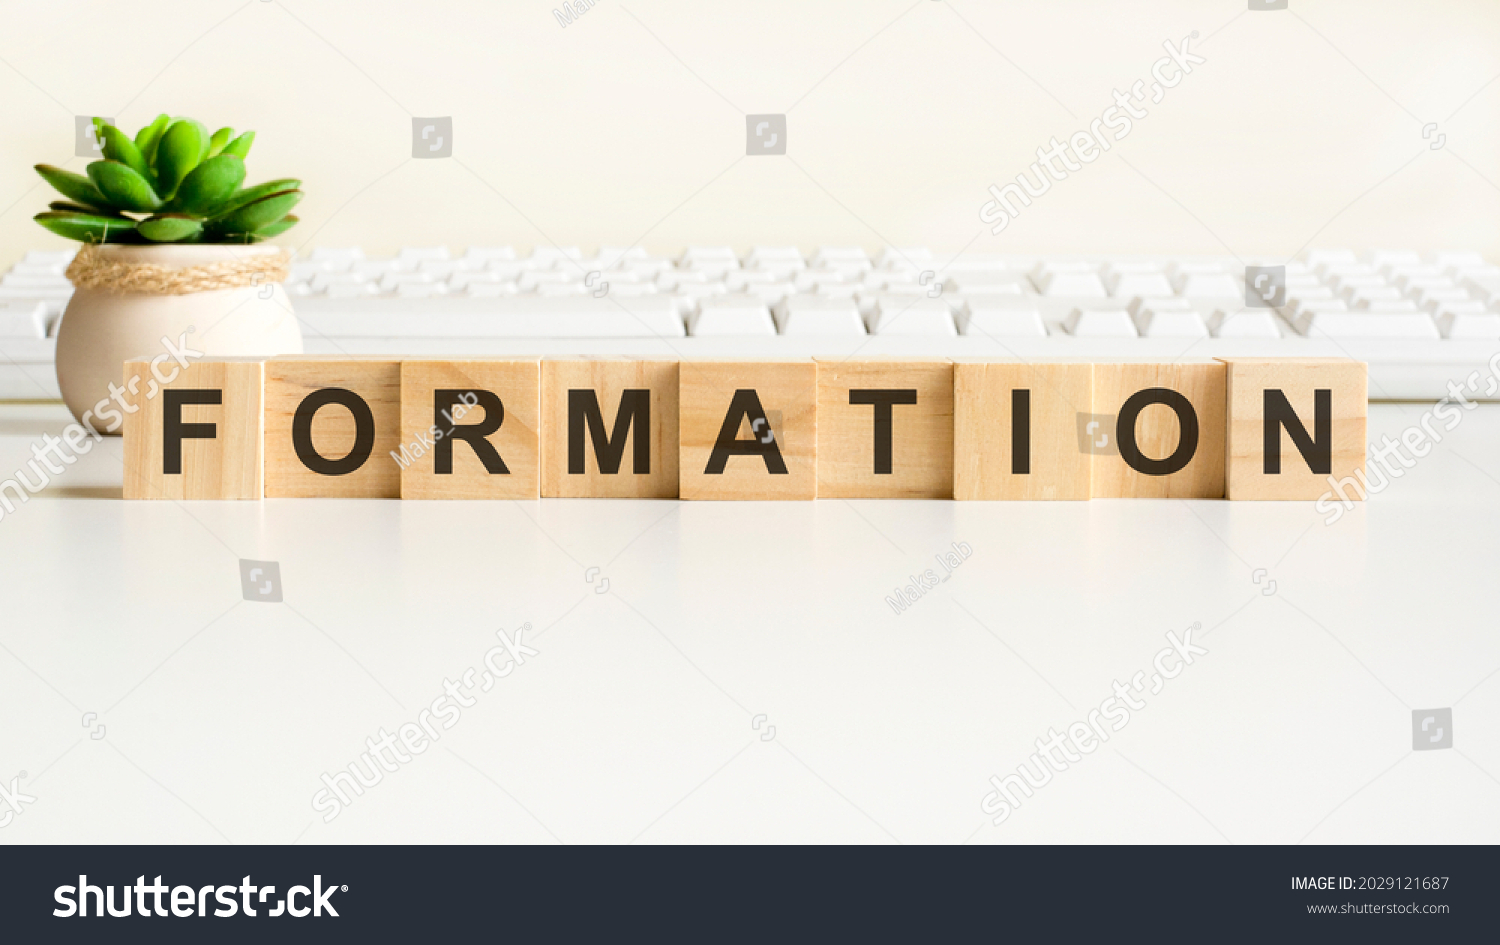 objective word made with wooden blocks. front view concepts, green plant in a flower vase and white keyboard on background #2029121687